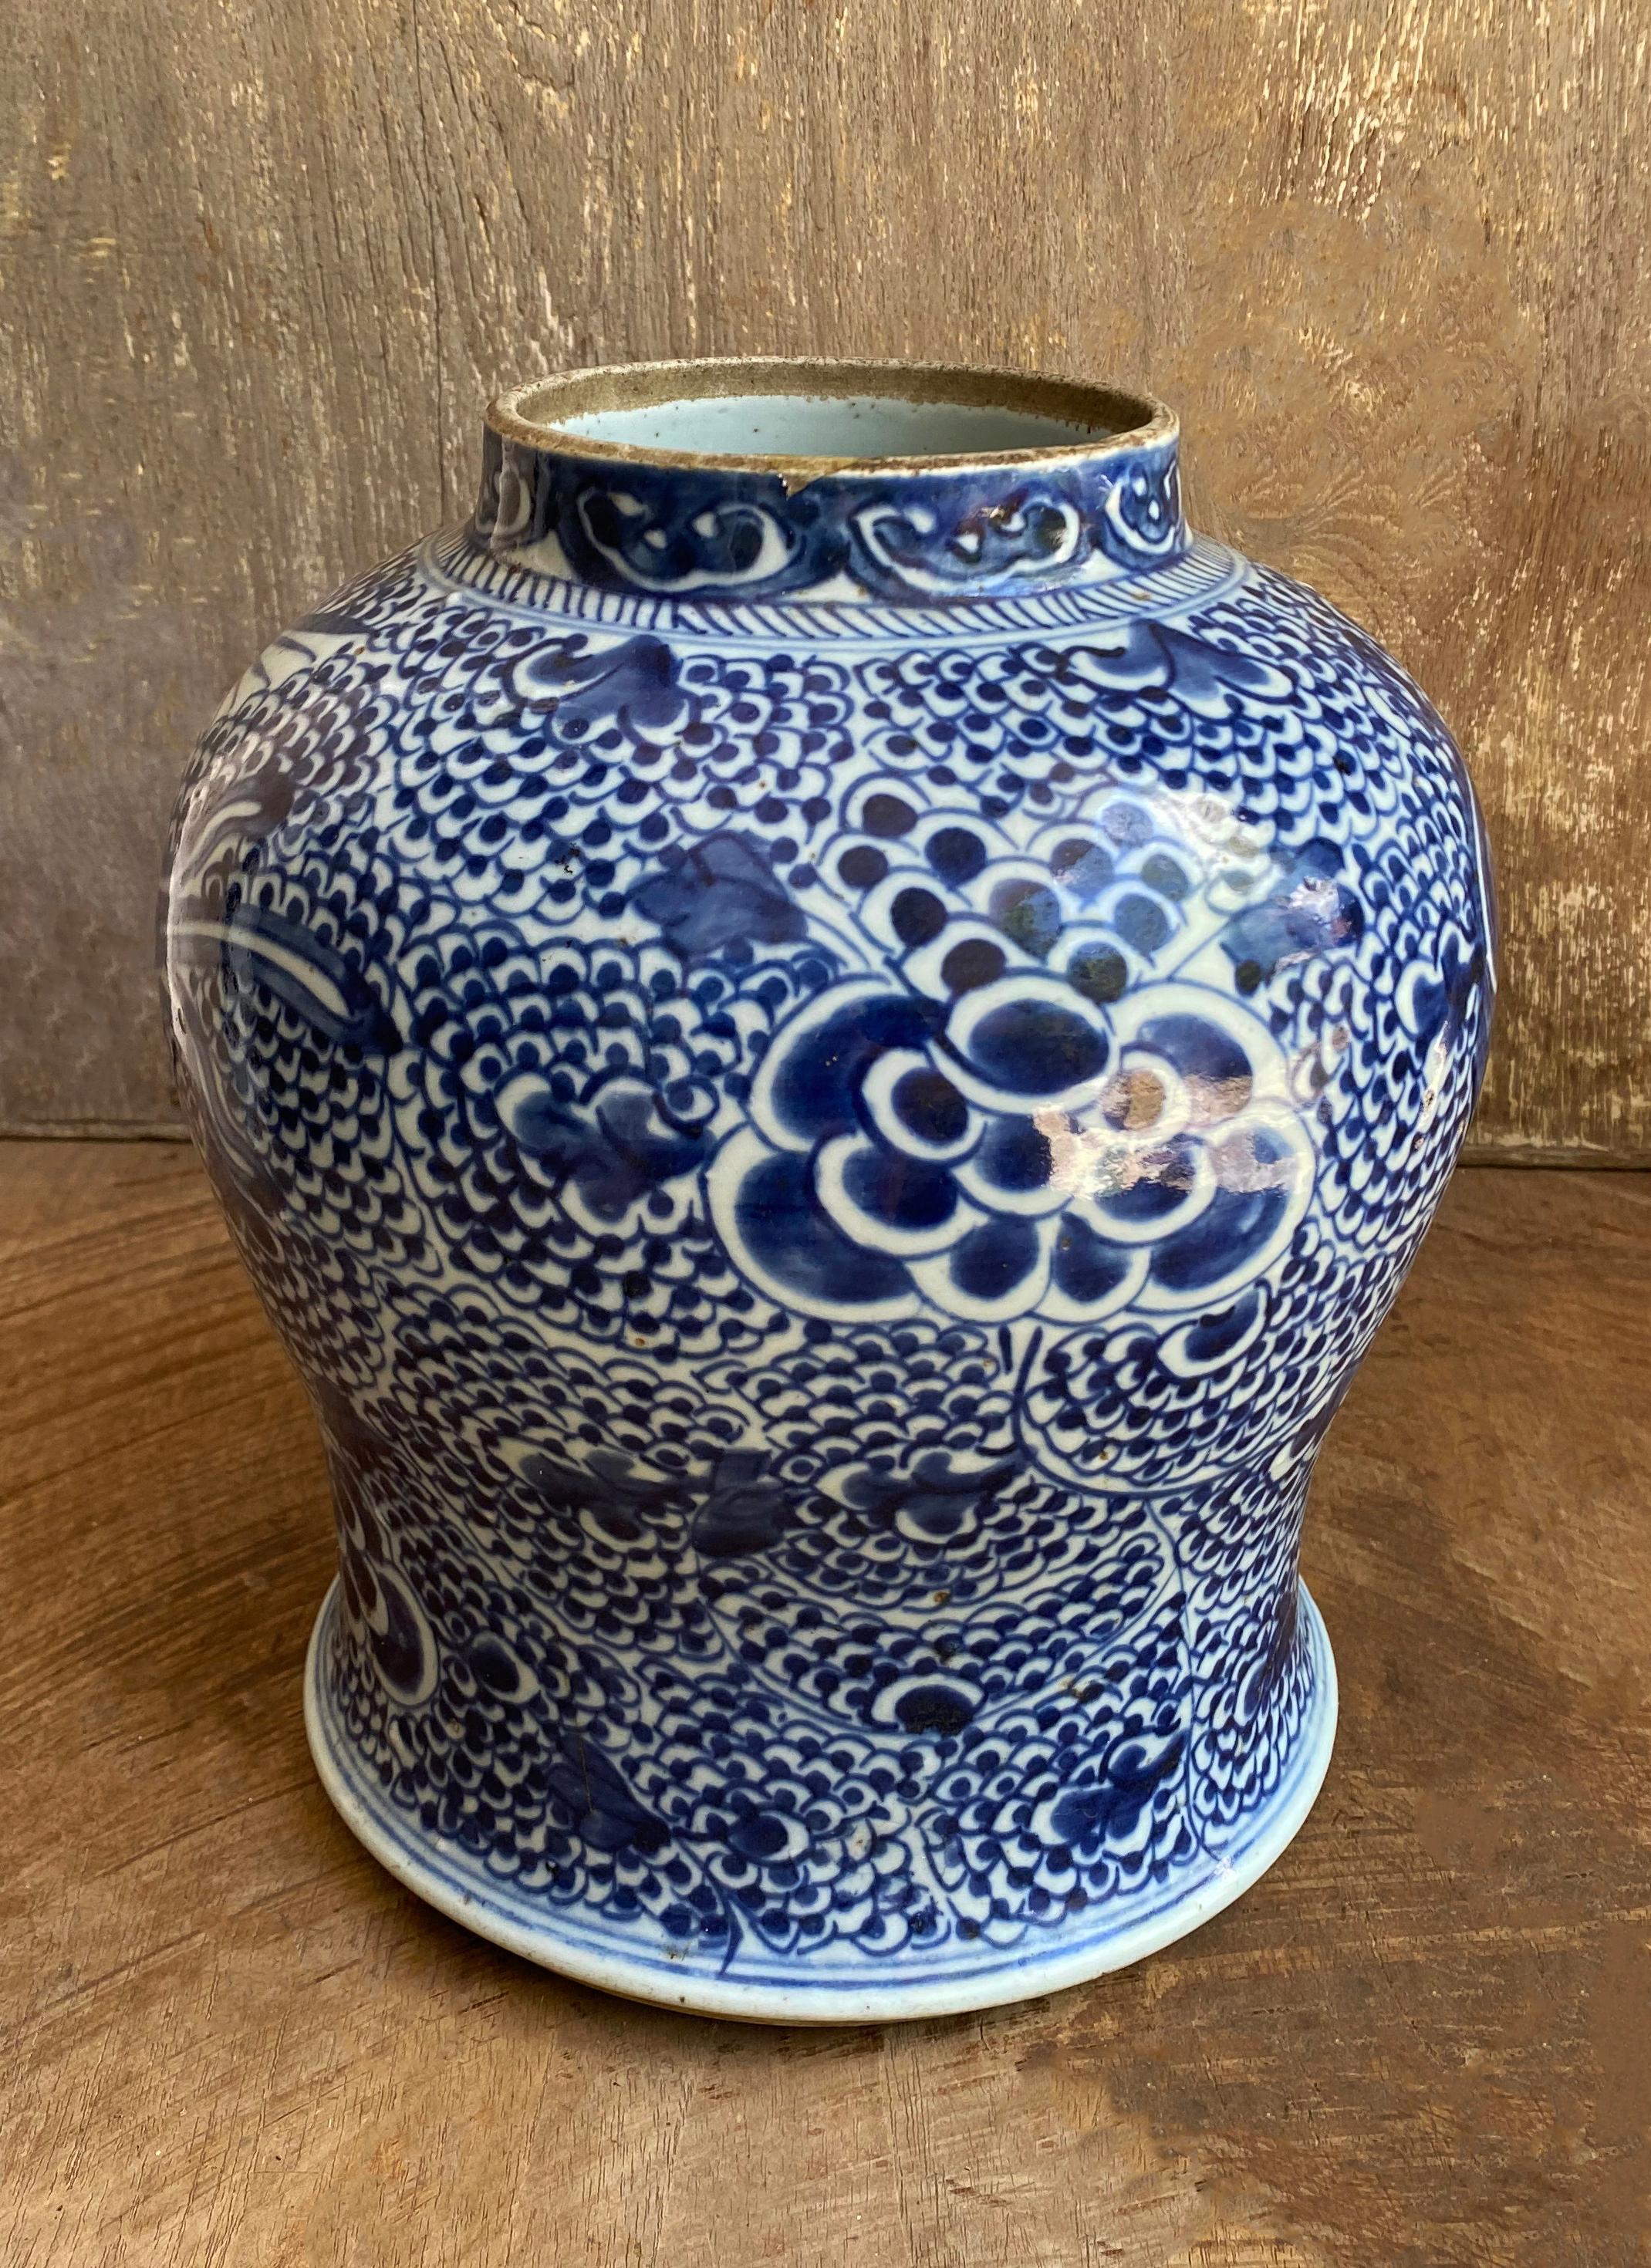 An early 20th century blue & white Chinese porcelain jar with hand-painted motif featuring birds. 

Dimensions: Height 24cm x diameter 20cm.